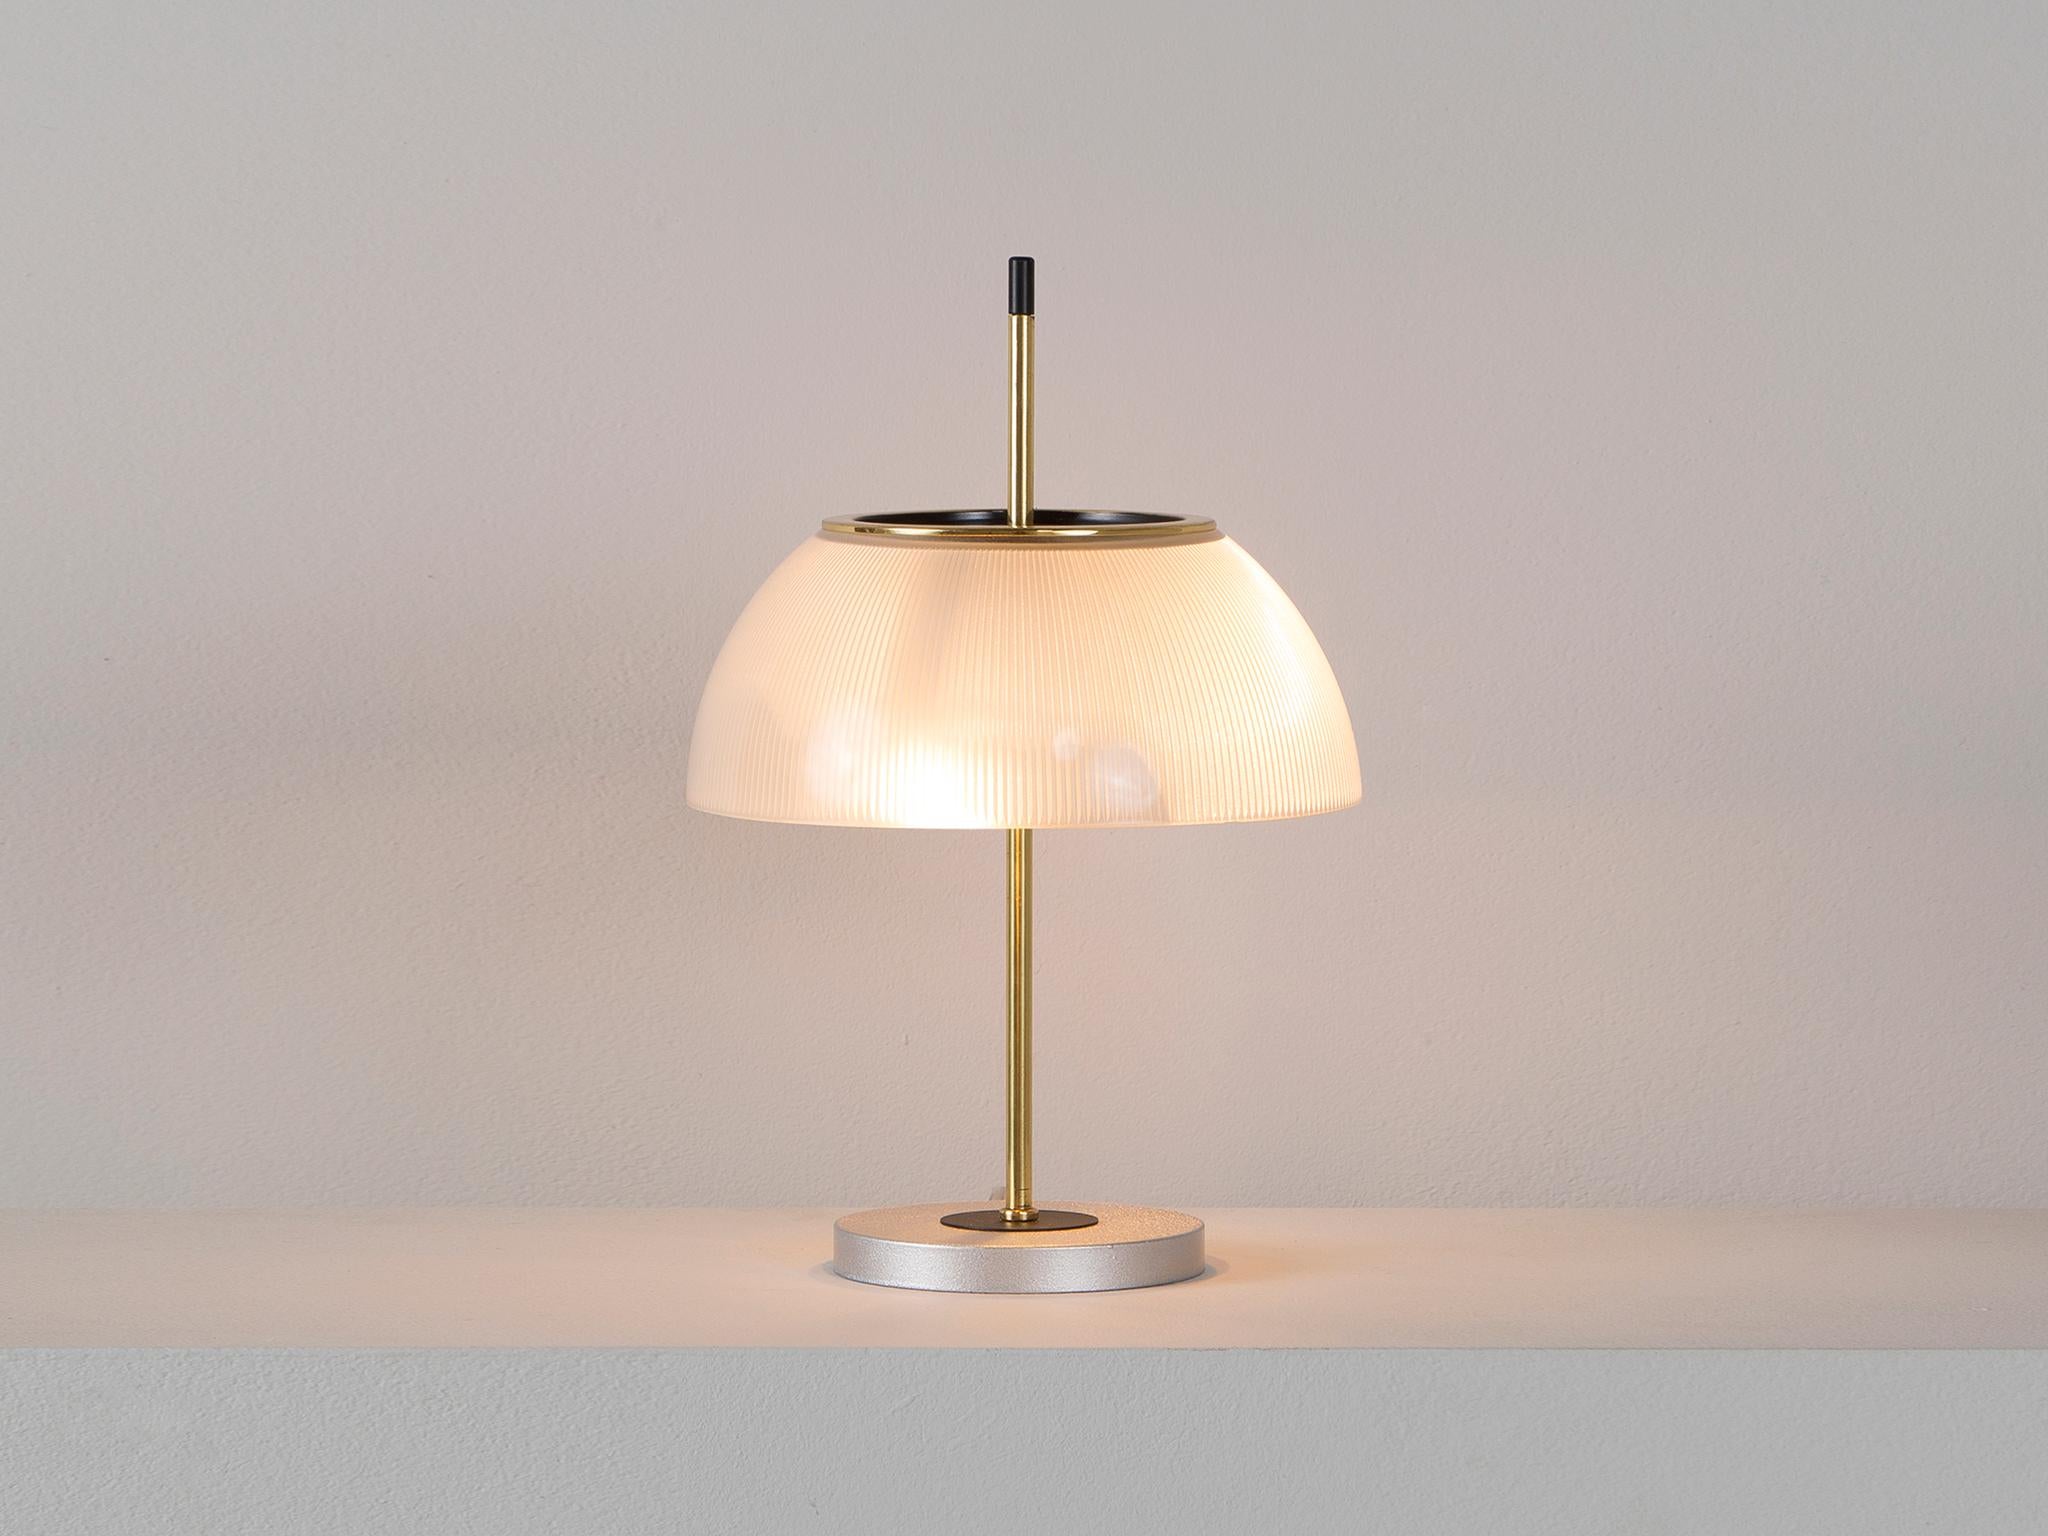 Adjustable Italian table lamp with glass sphere, finished whit elegant brass details.